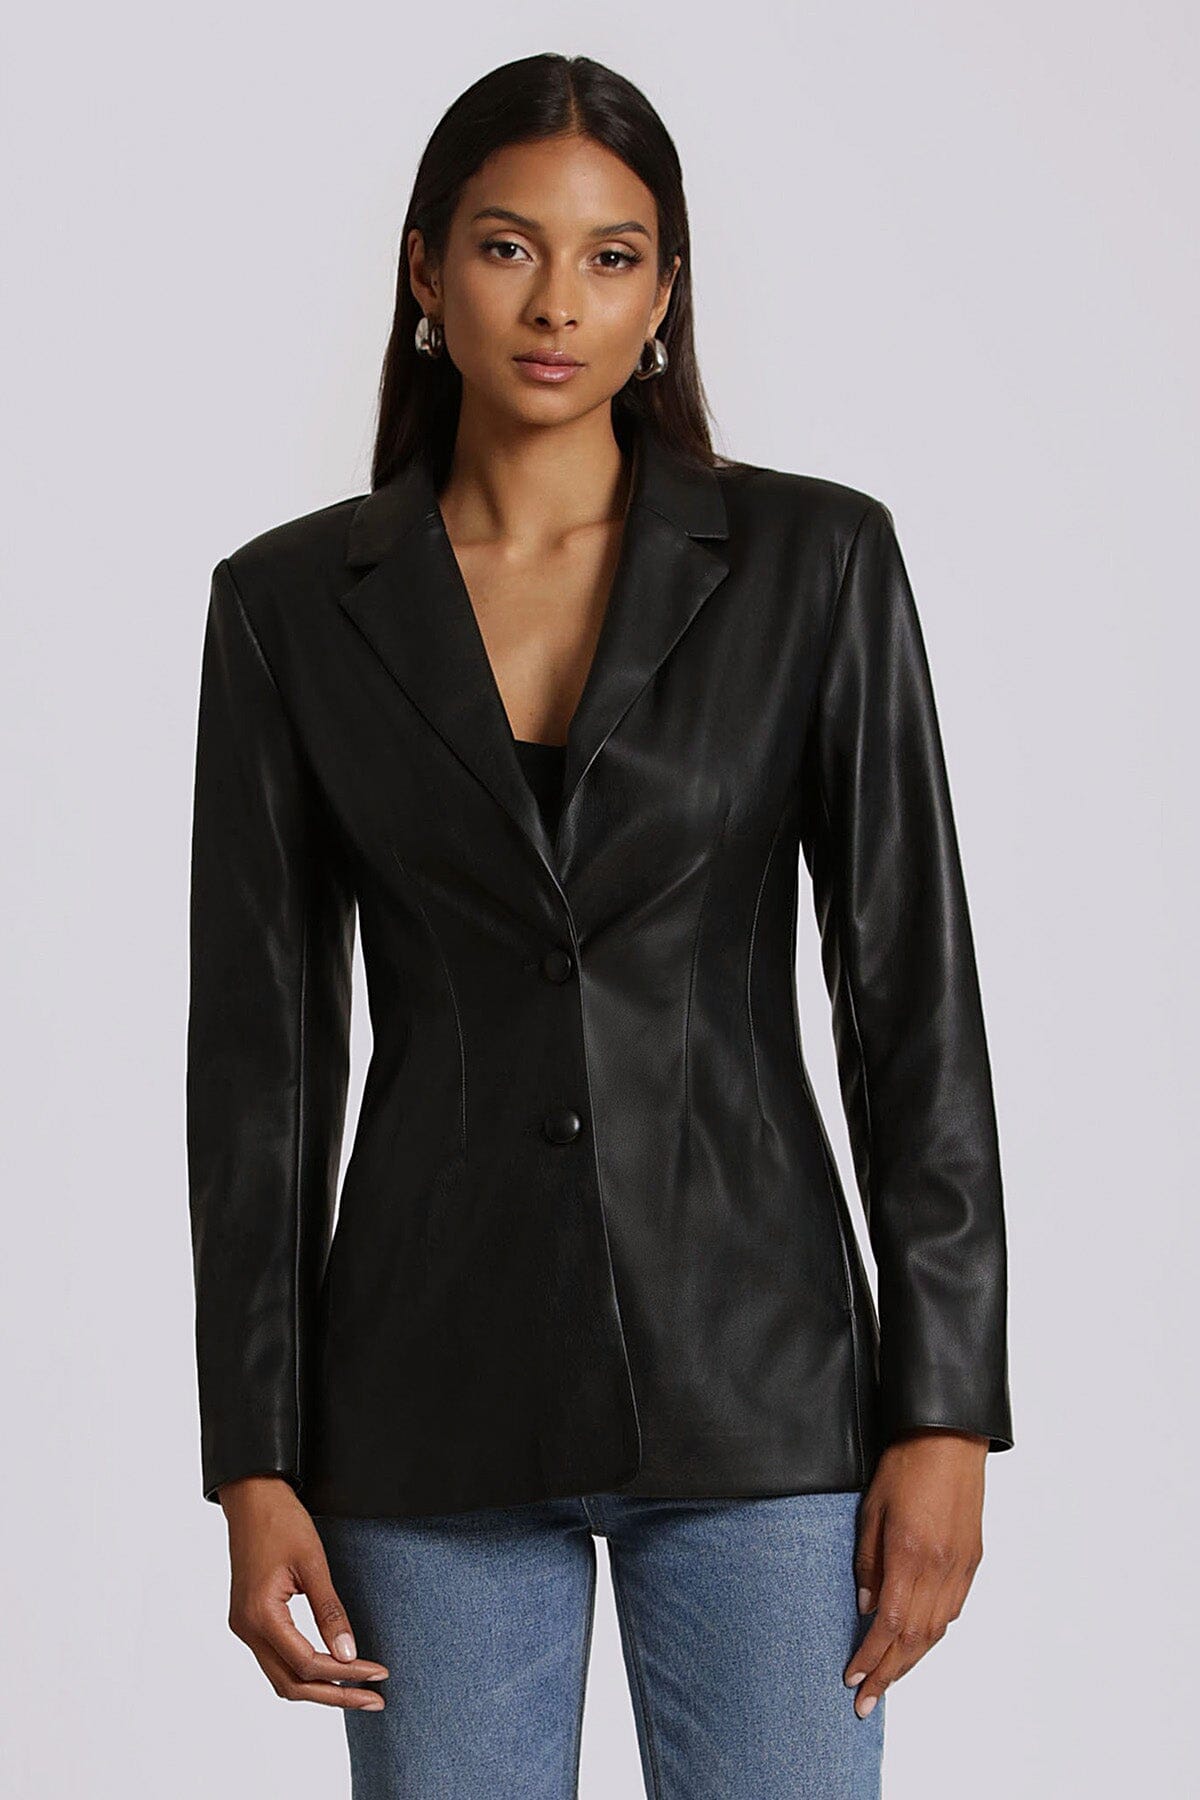 faux ever leather sculpted blazer jacket coat black - women's figure flattering day to night blazers outerwear